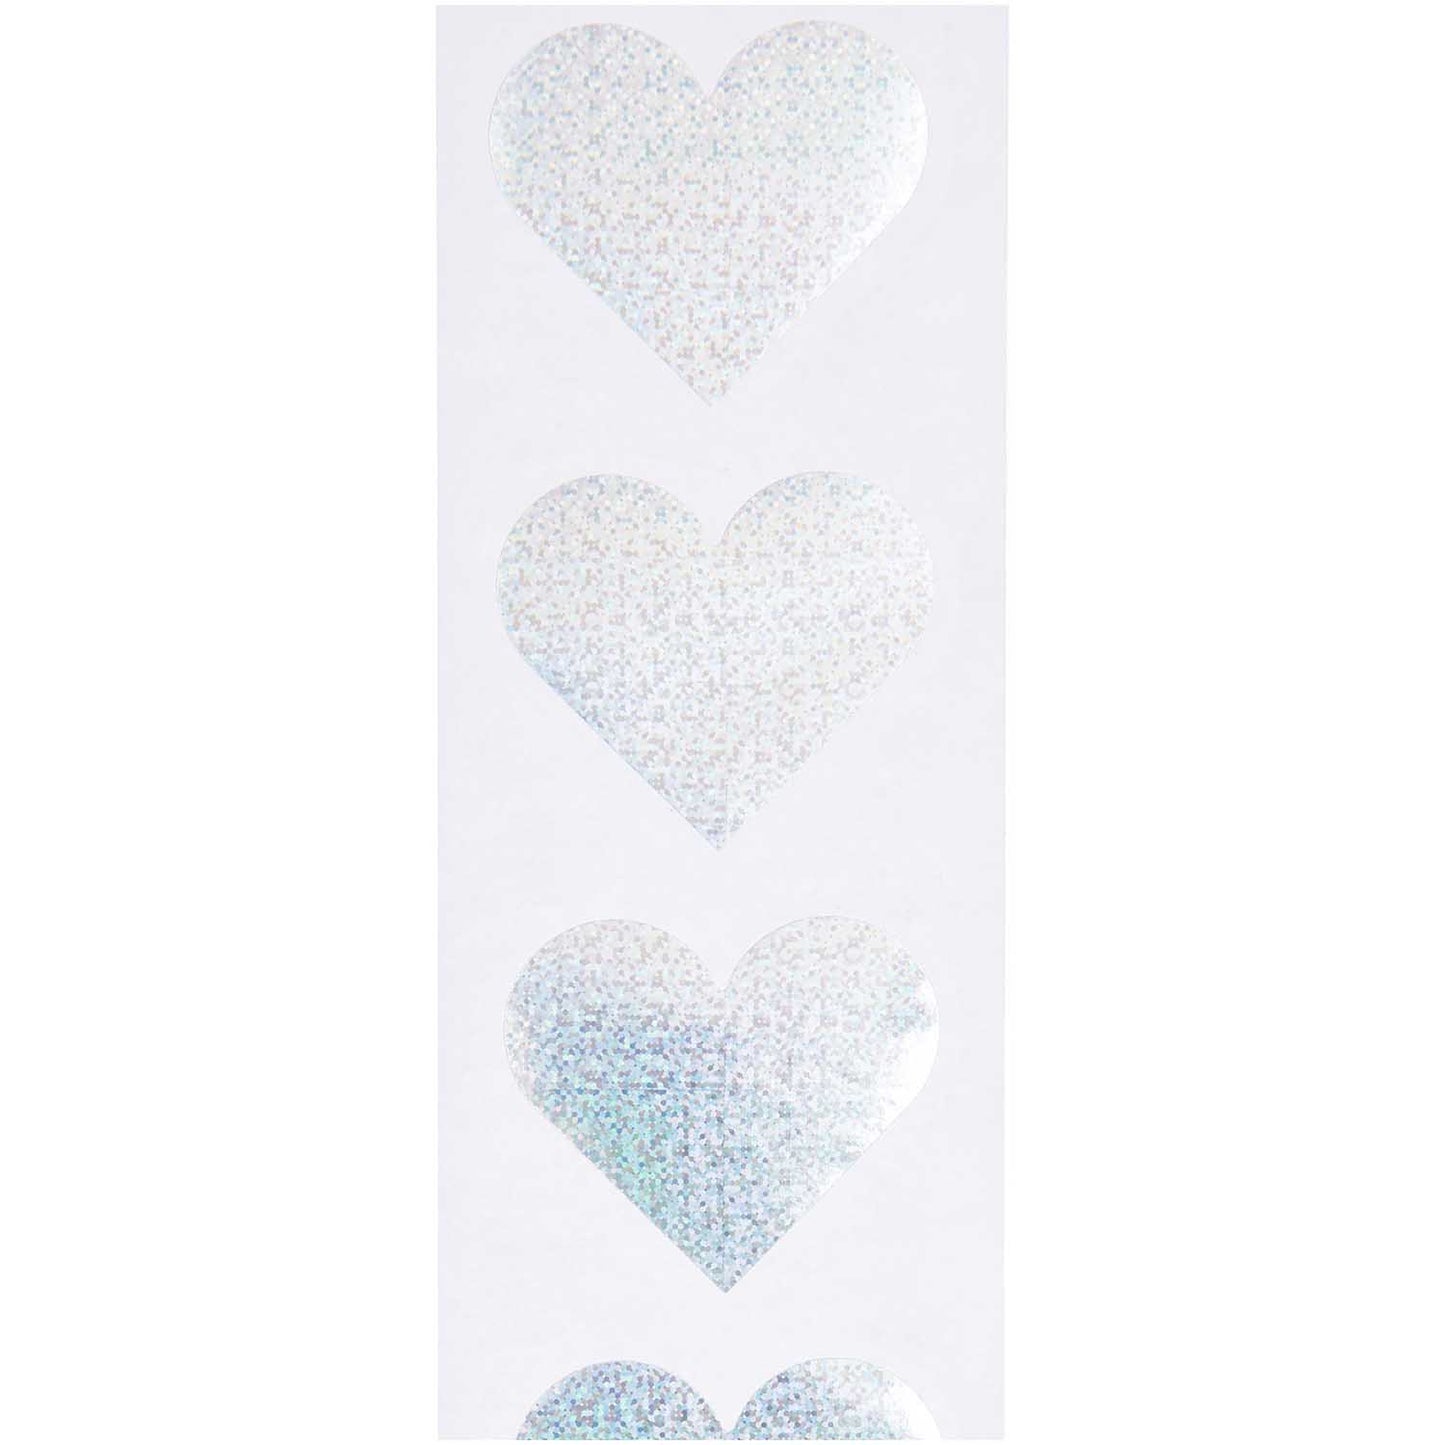 Holographic Silver Heart Stickers